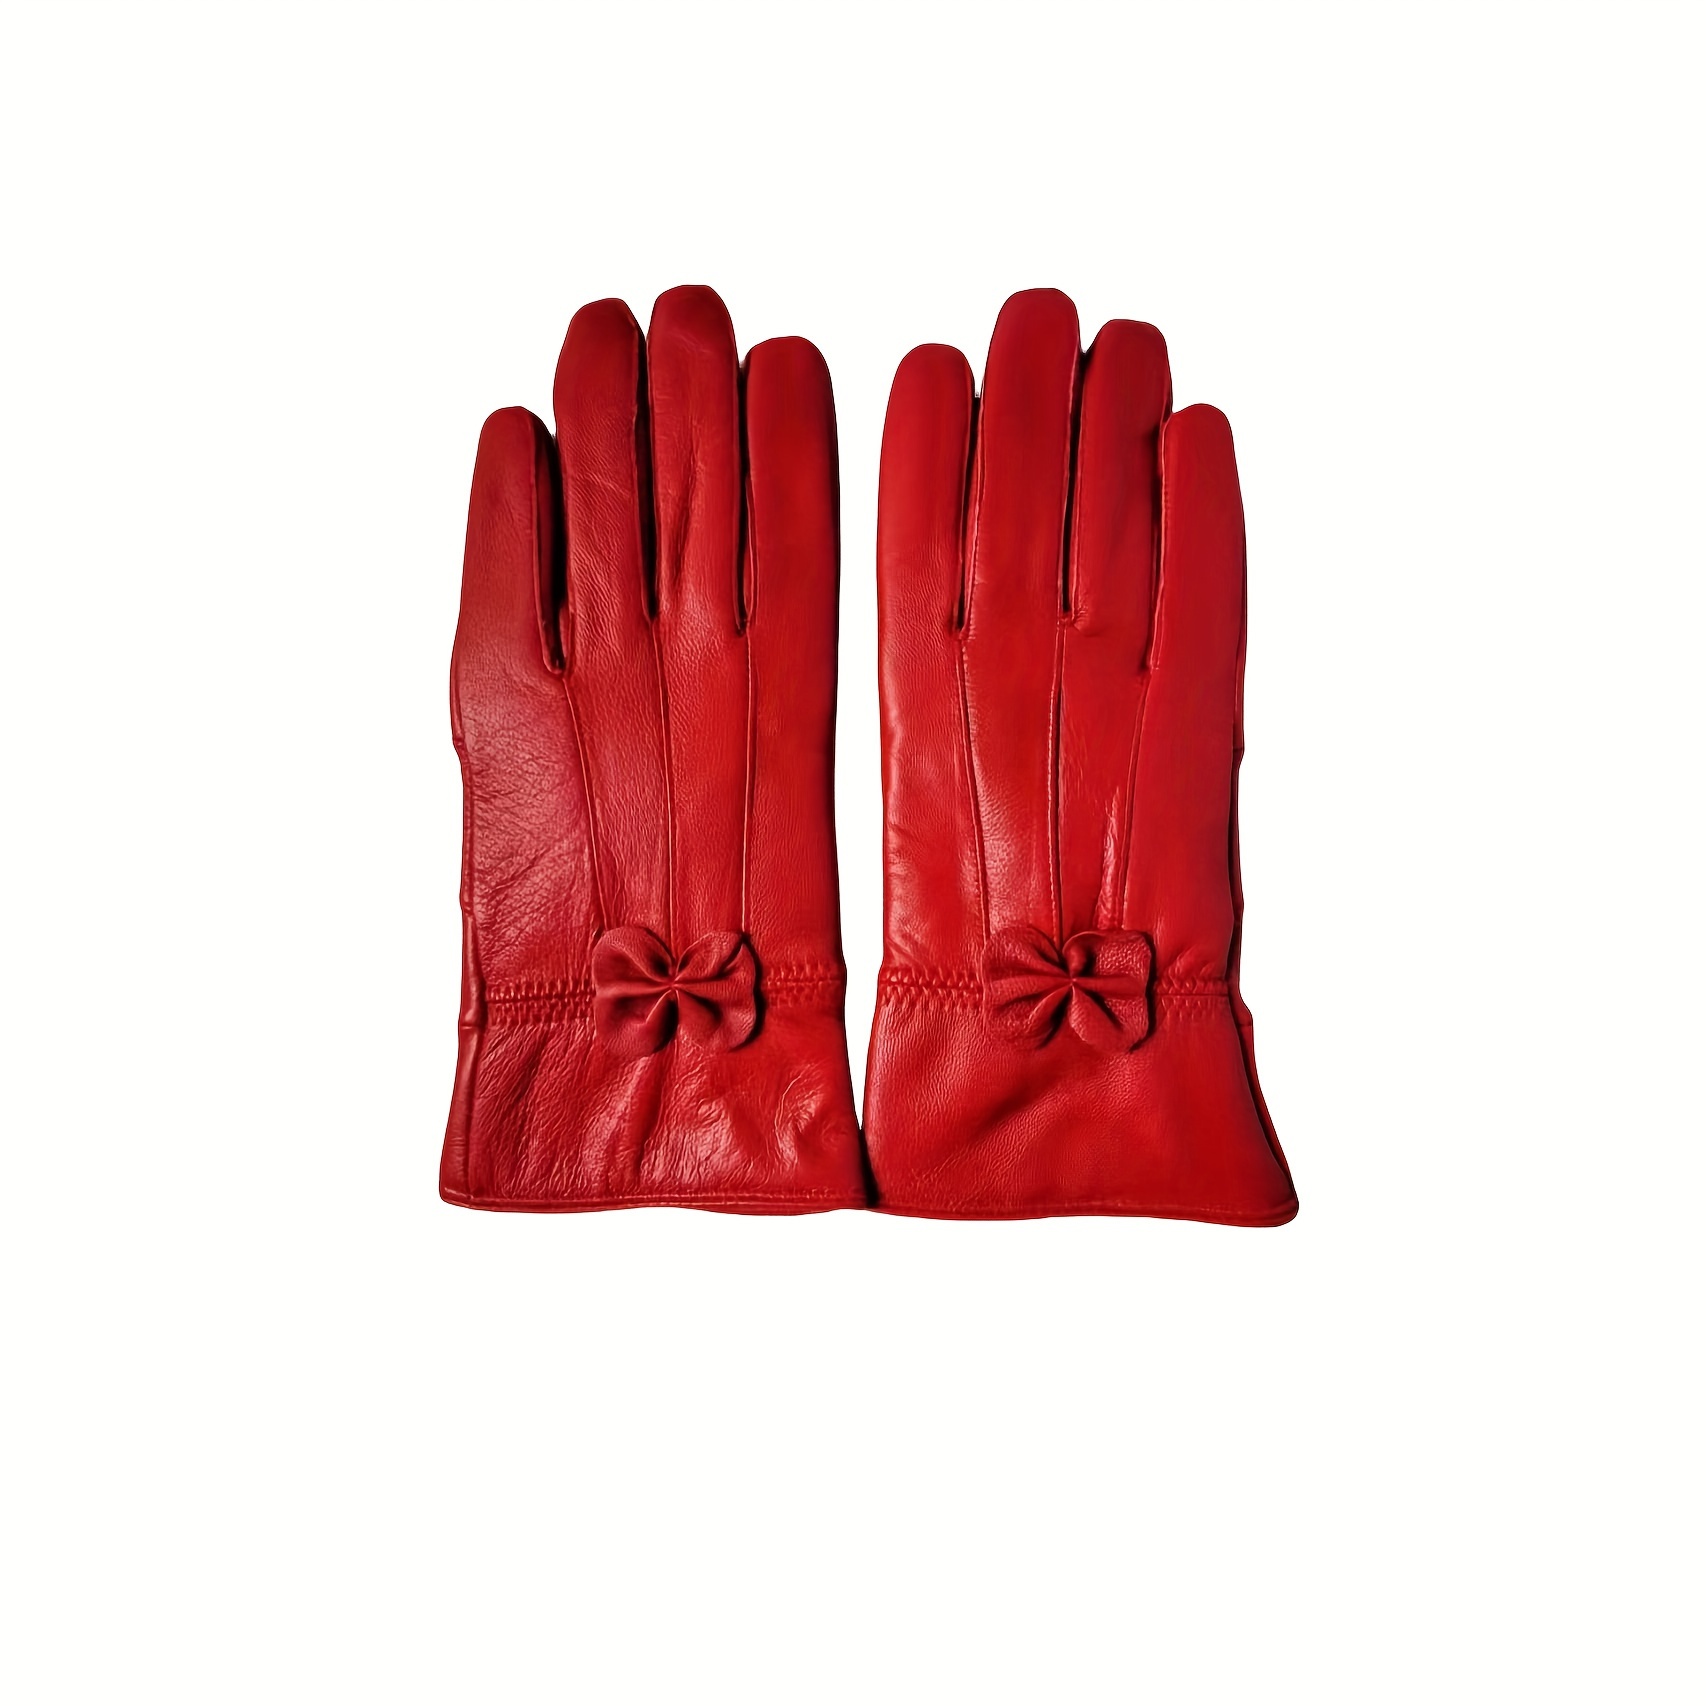 

Women's Genuine Leather Gloves, Soft Breathable, Red With Bow Detail, For Riding & Outdoor Activities - Various Sizes (s/m/l)